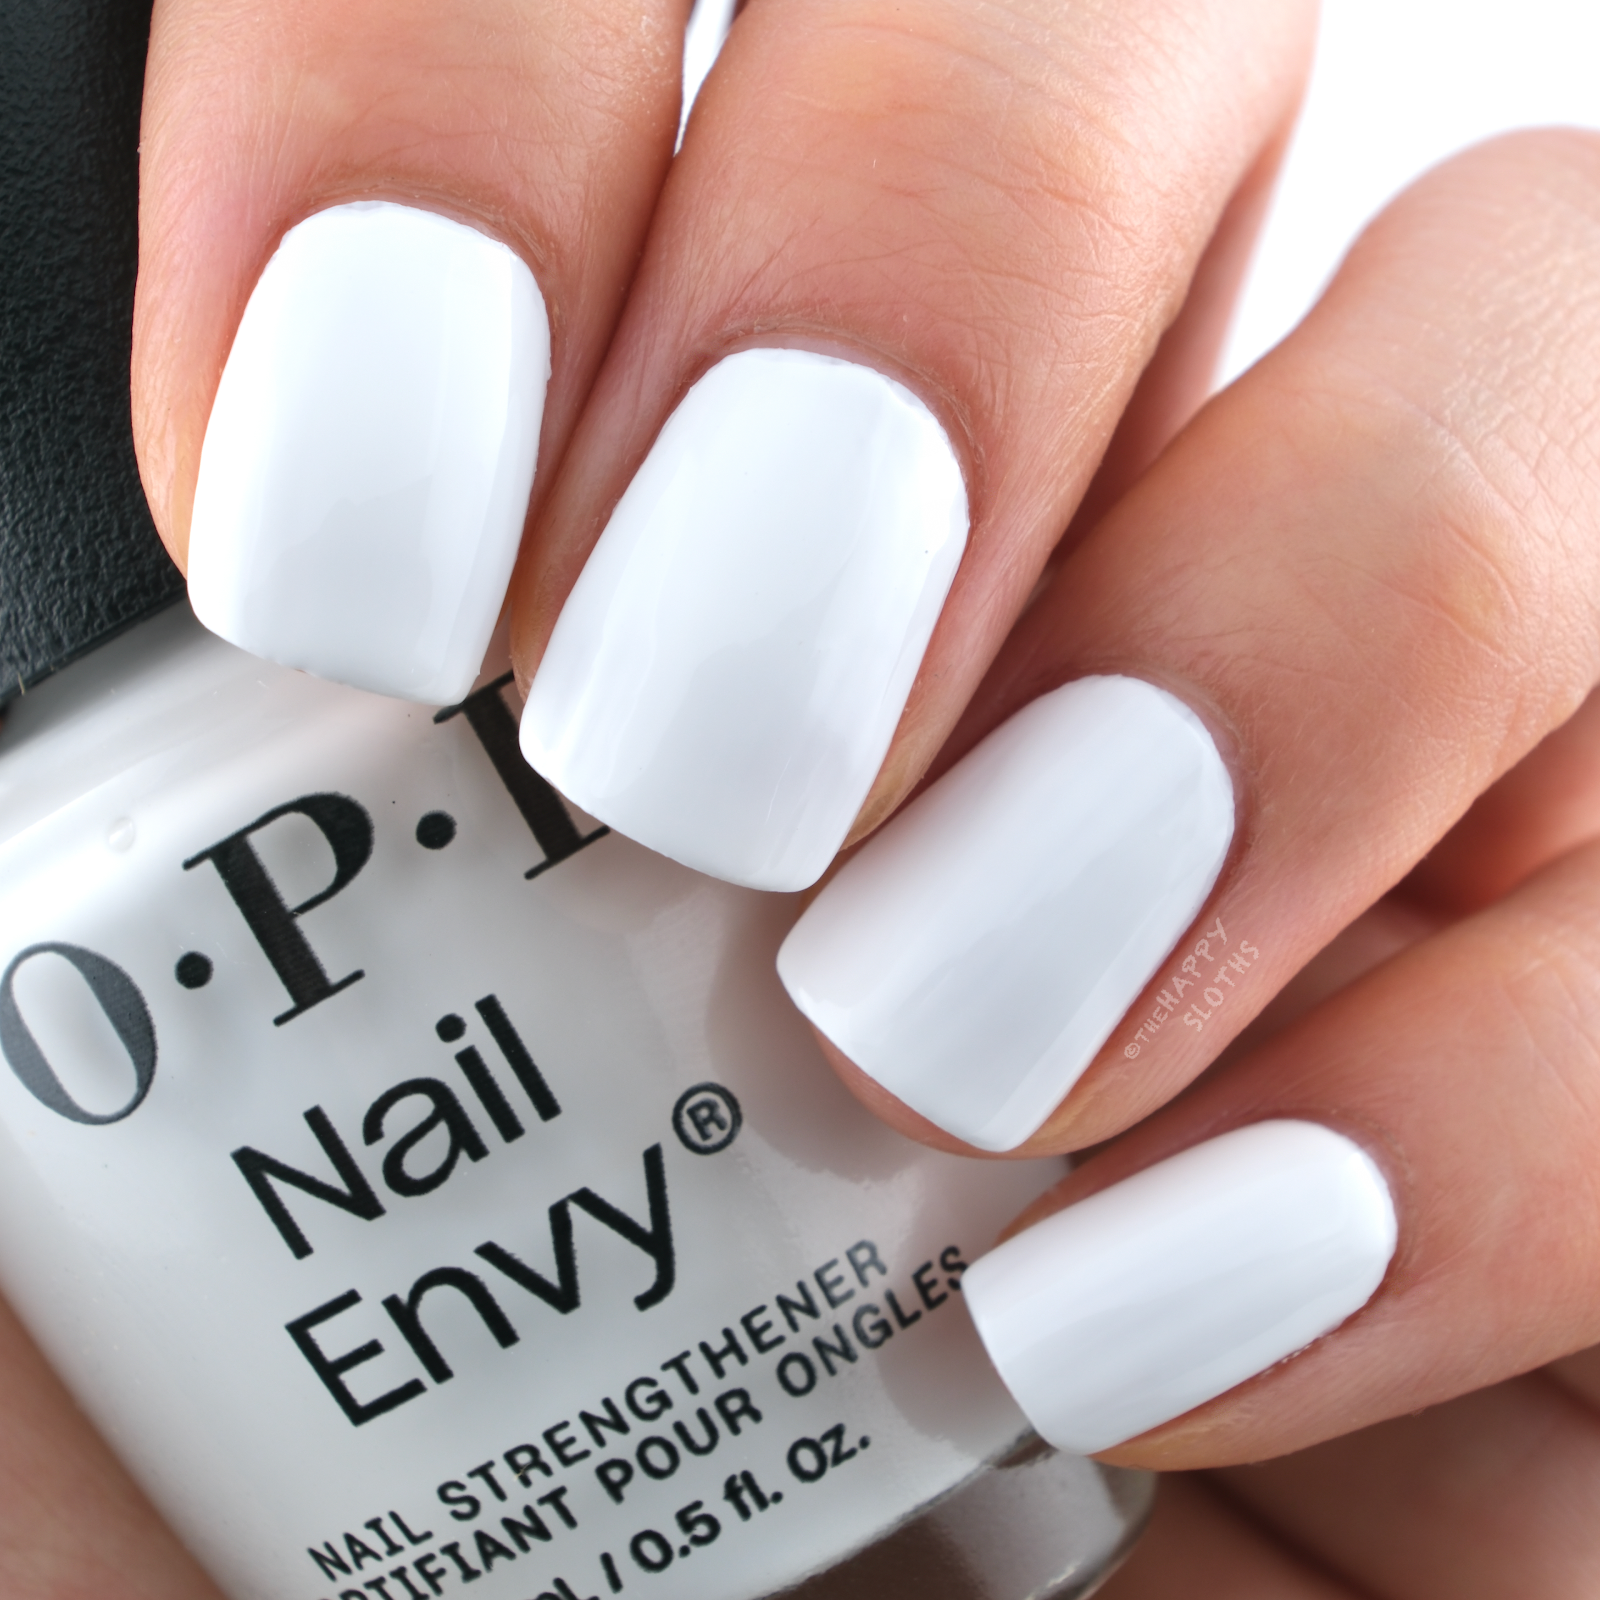 OPI | *NEW* Nail Envy Nail Strengthener | Alpine Snow: Review and Swatches